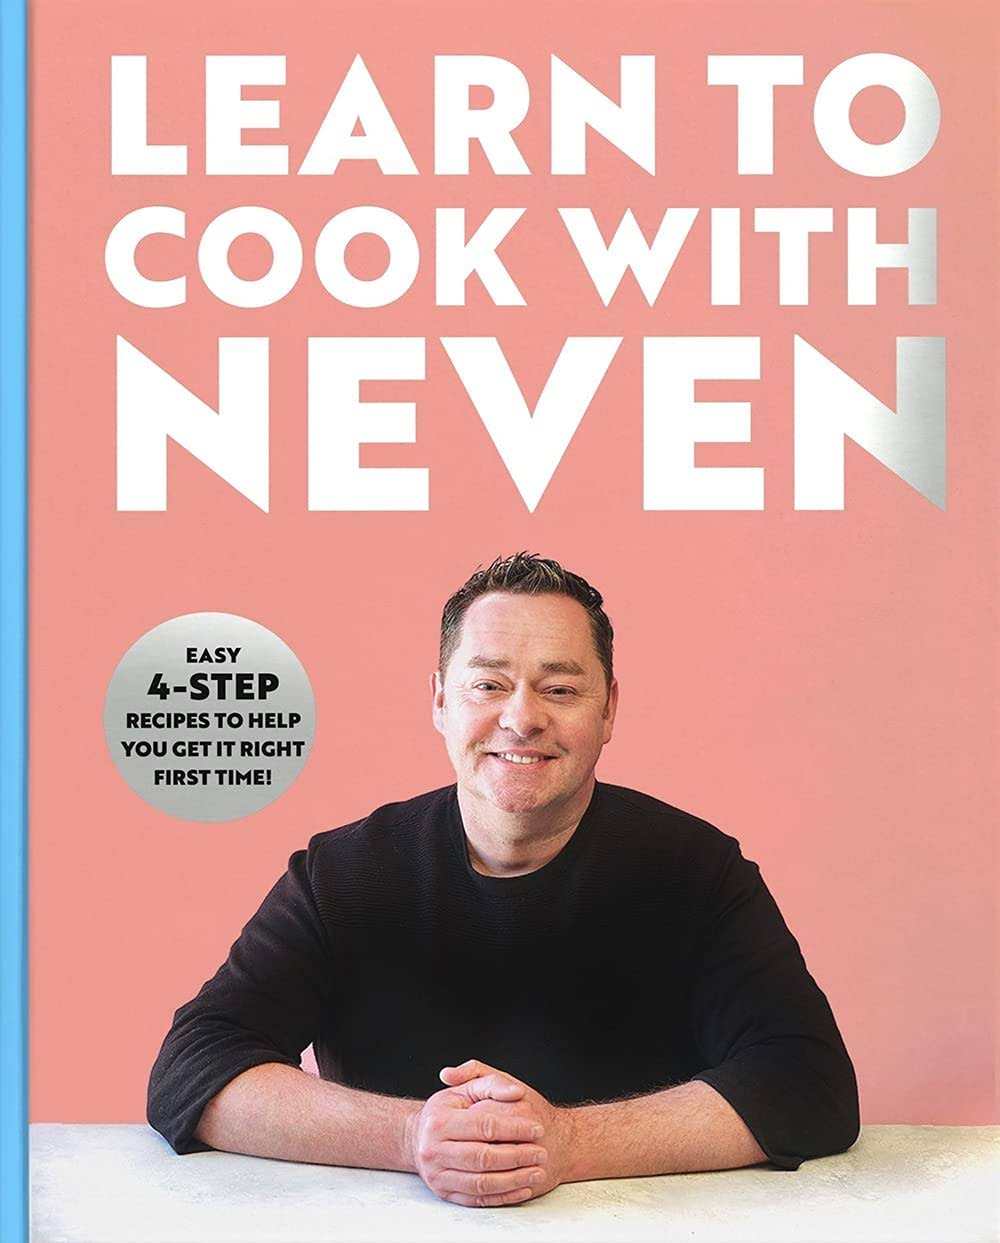 Learn to Cook with Neven [Book]